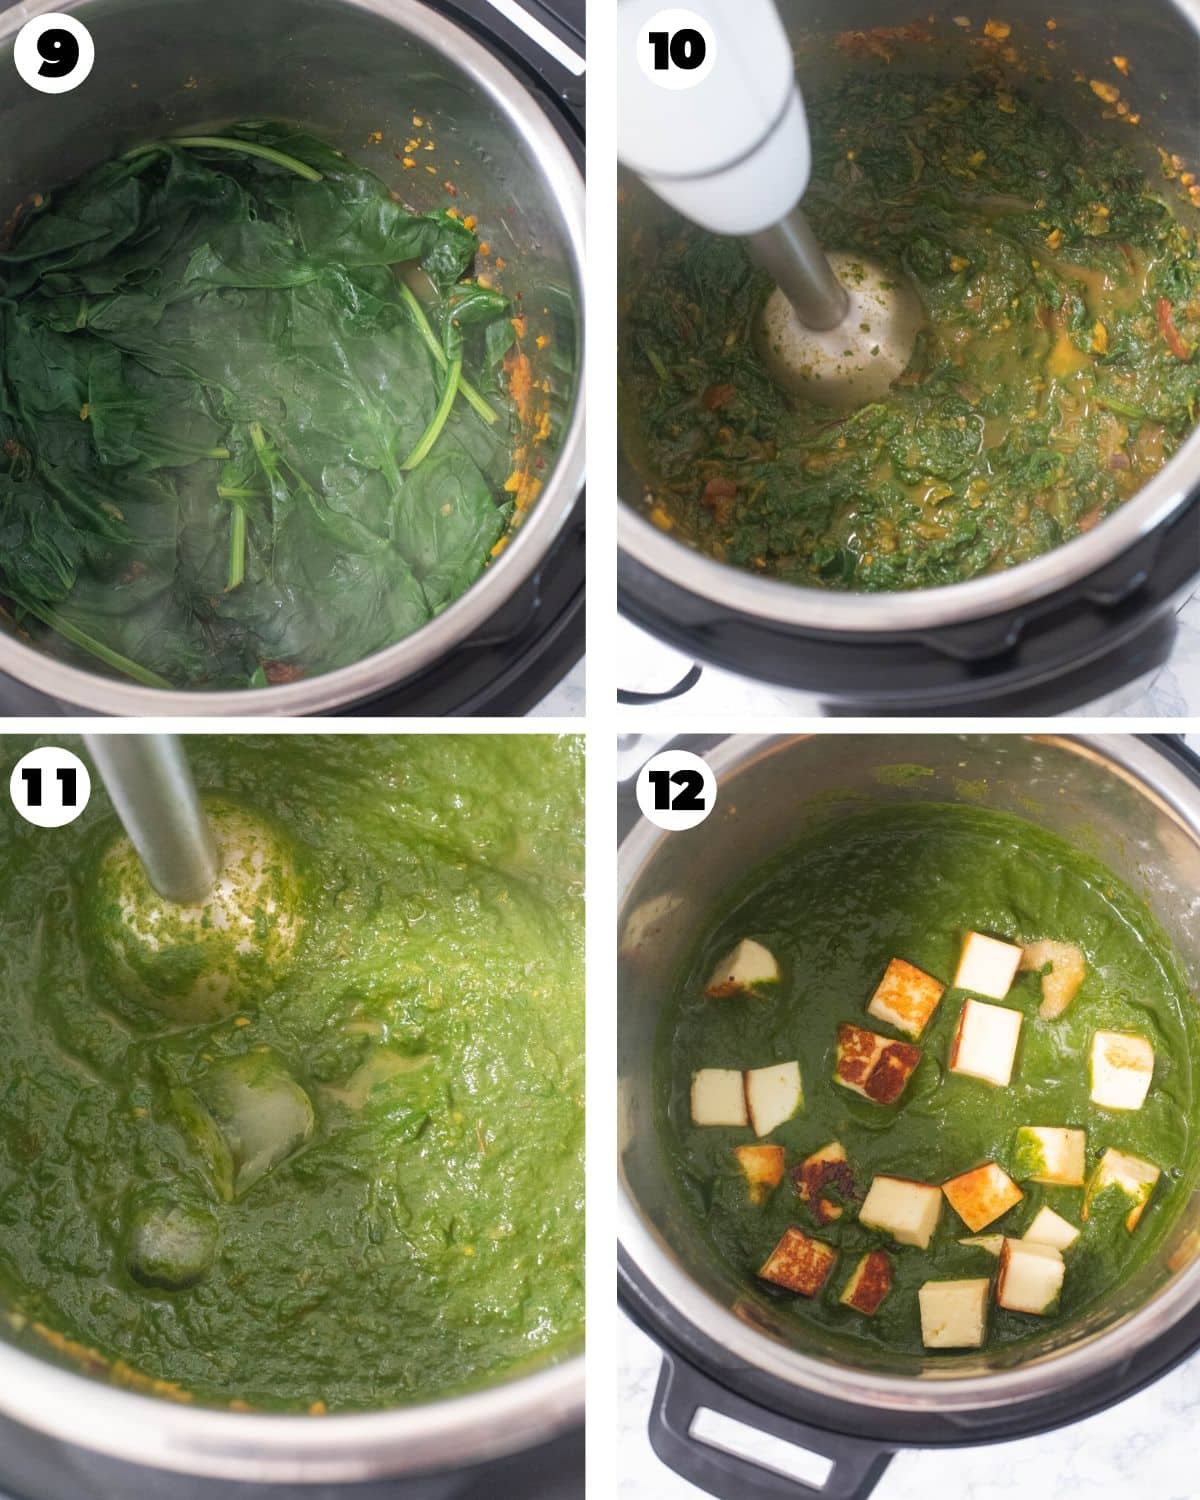 Blending cooked spinach in a sauce for saag paneer